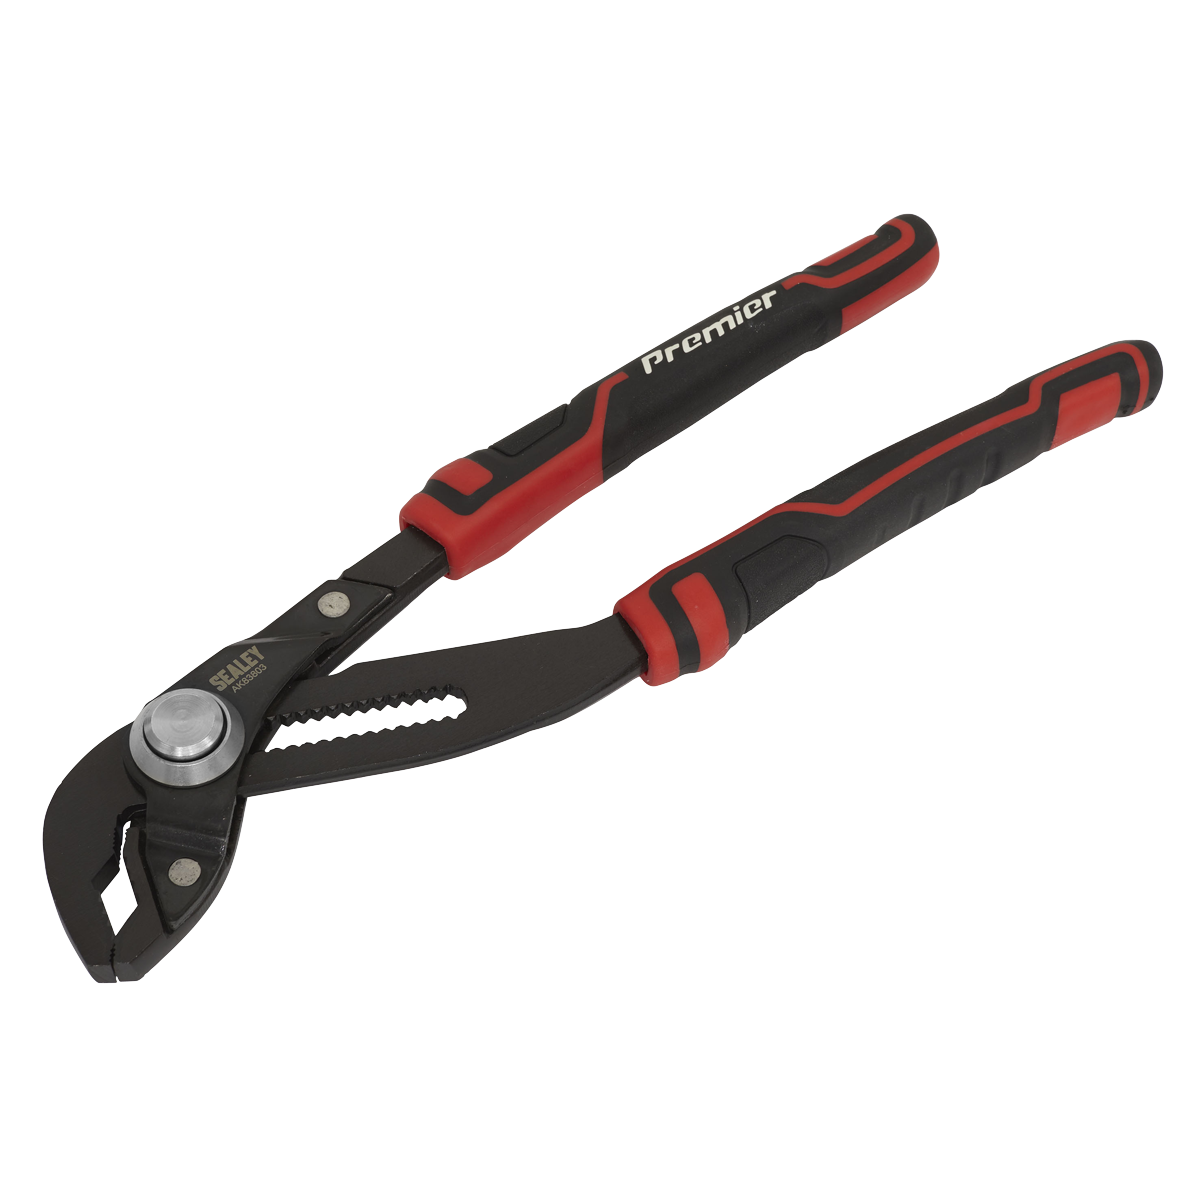 Sealey 300mm Quick Release Water Pump Pliers AK83803